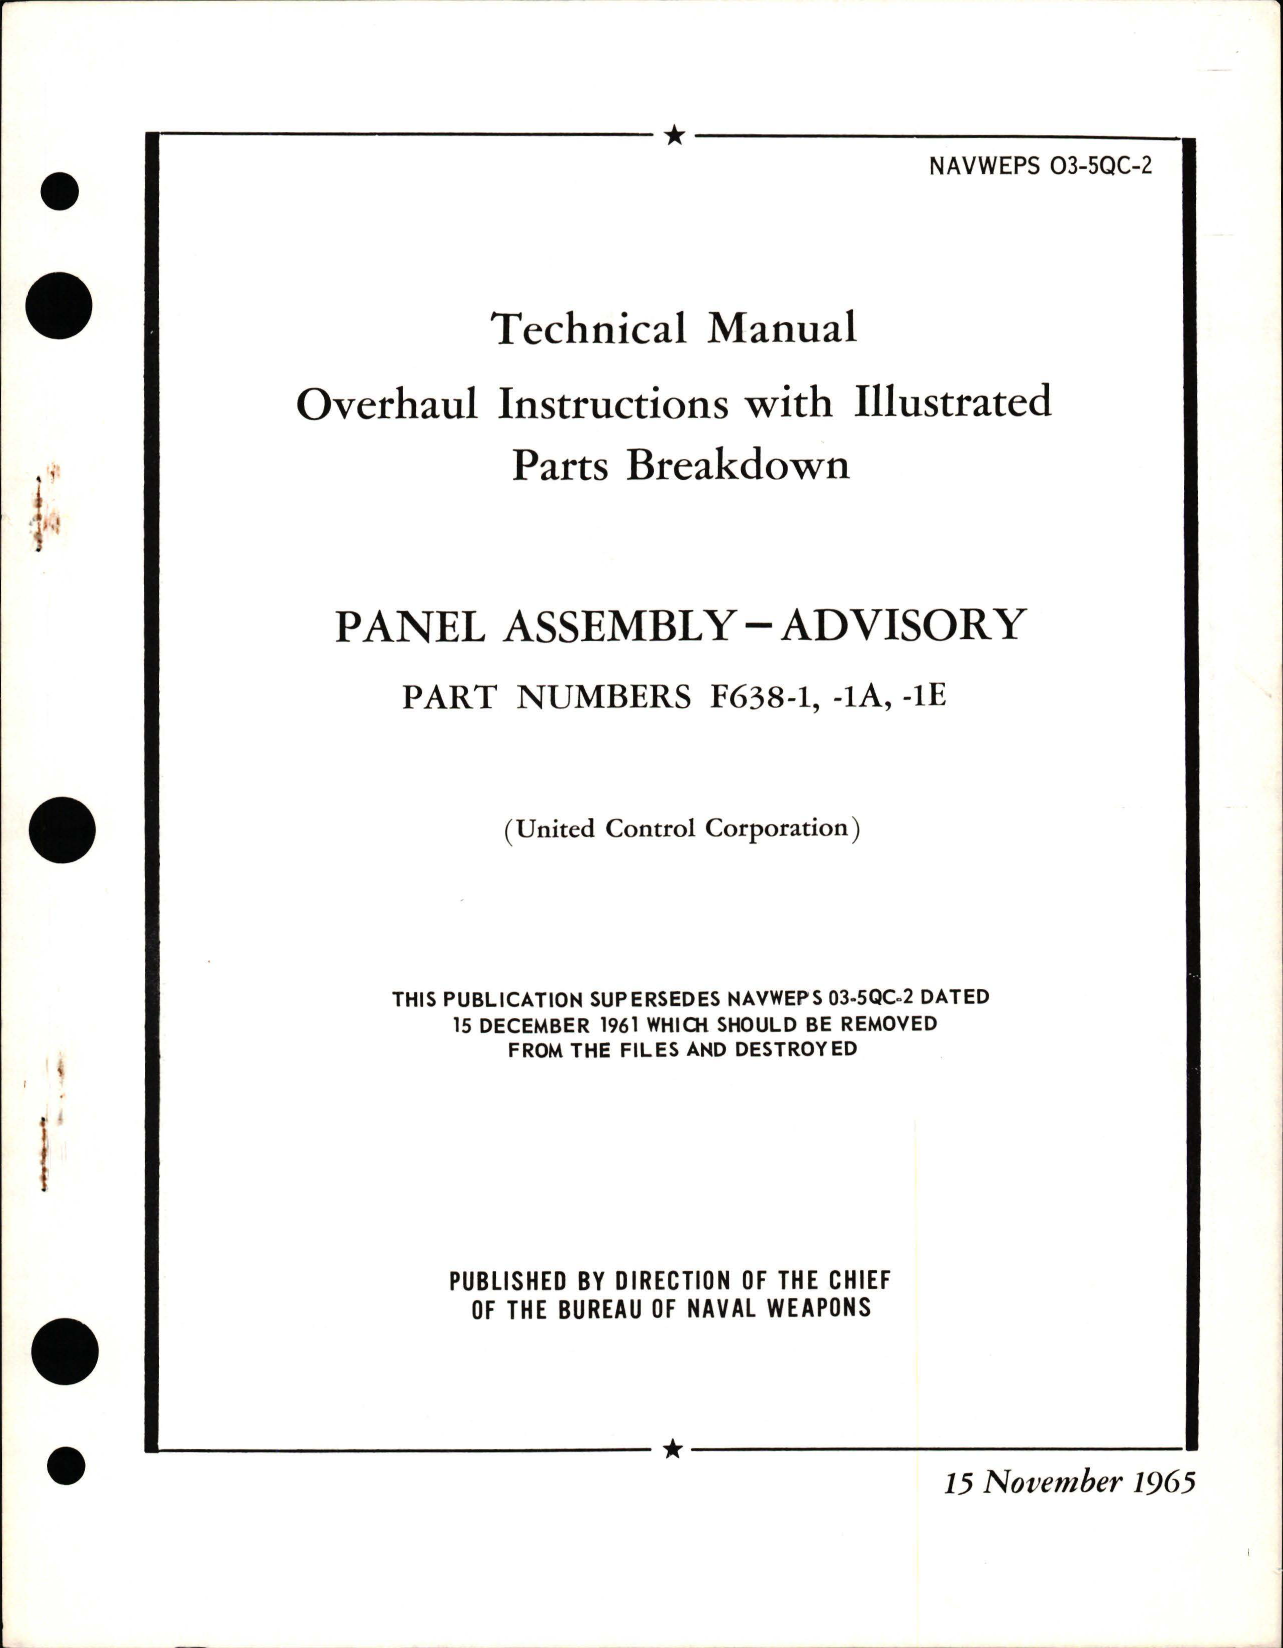 Sample page 1 from AirCorps Library document: Overhaul Instructions with Illustrated Parts Breakdown for Advisory Panel Assembly 